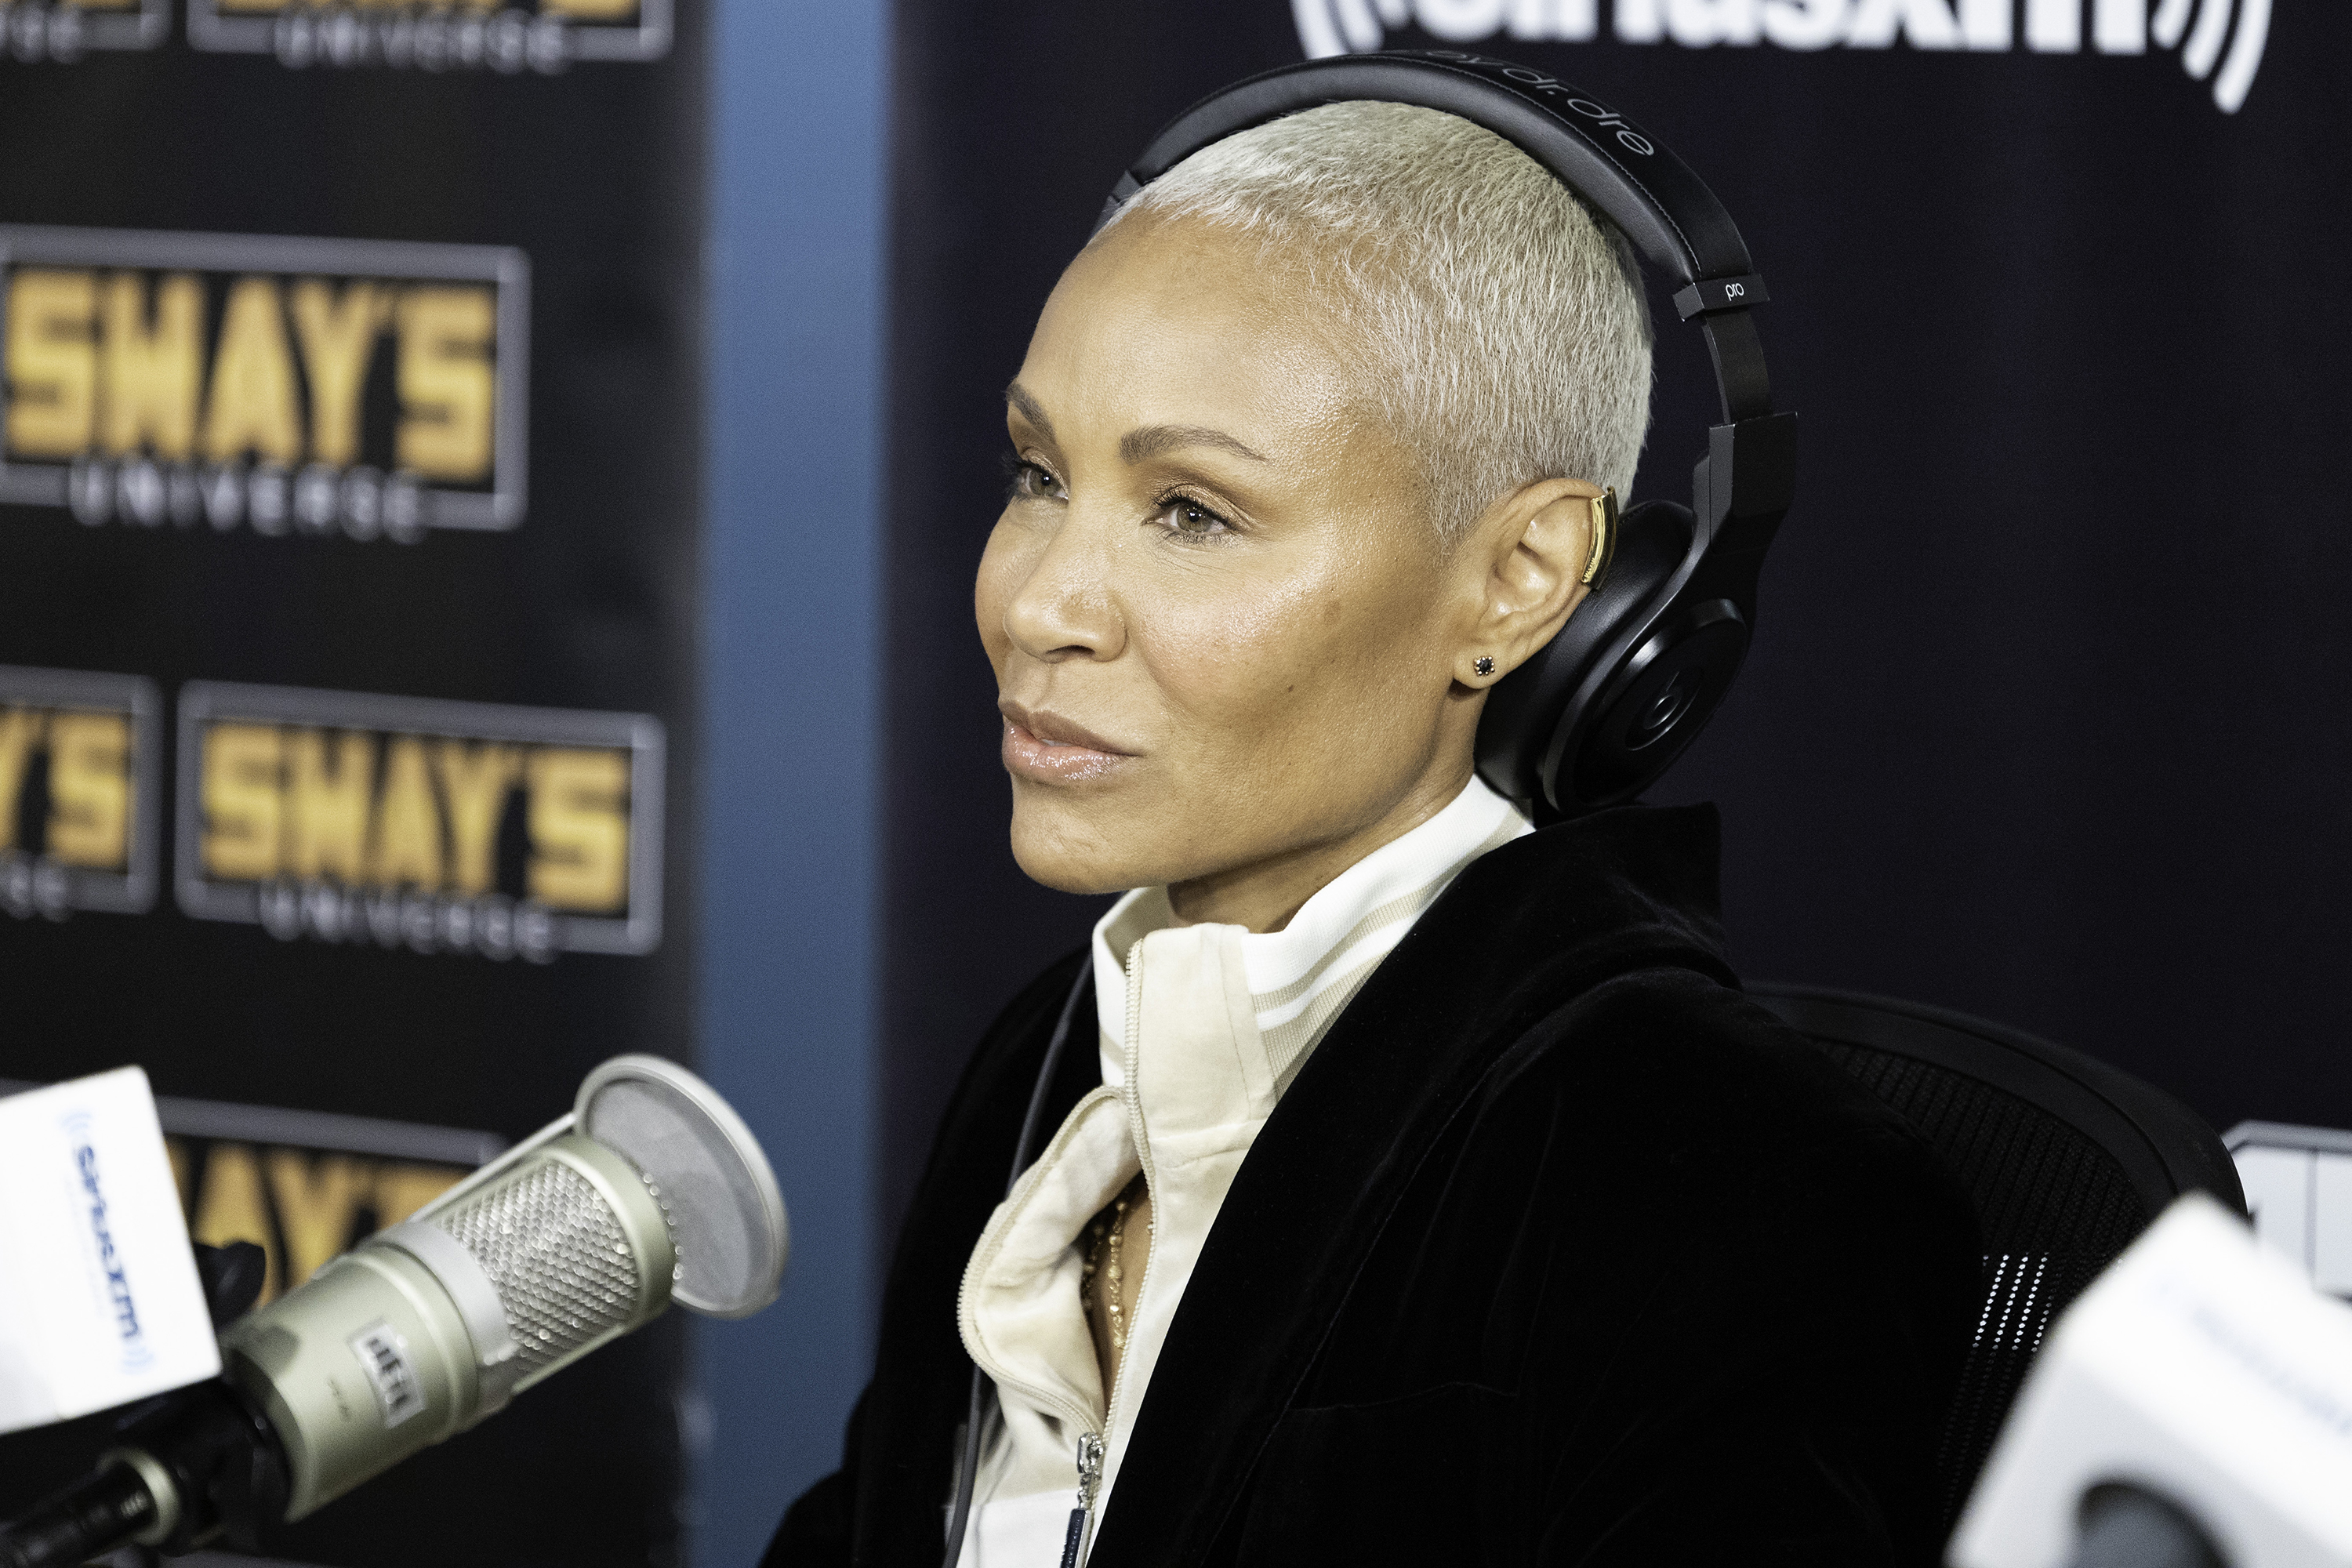 Close-up of Jada sitting in front of a microphone and wearing headphones during an interview